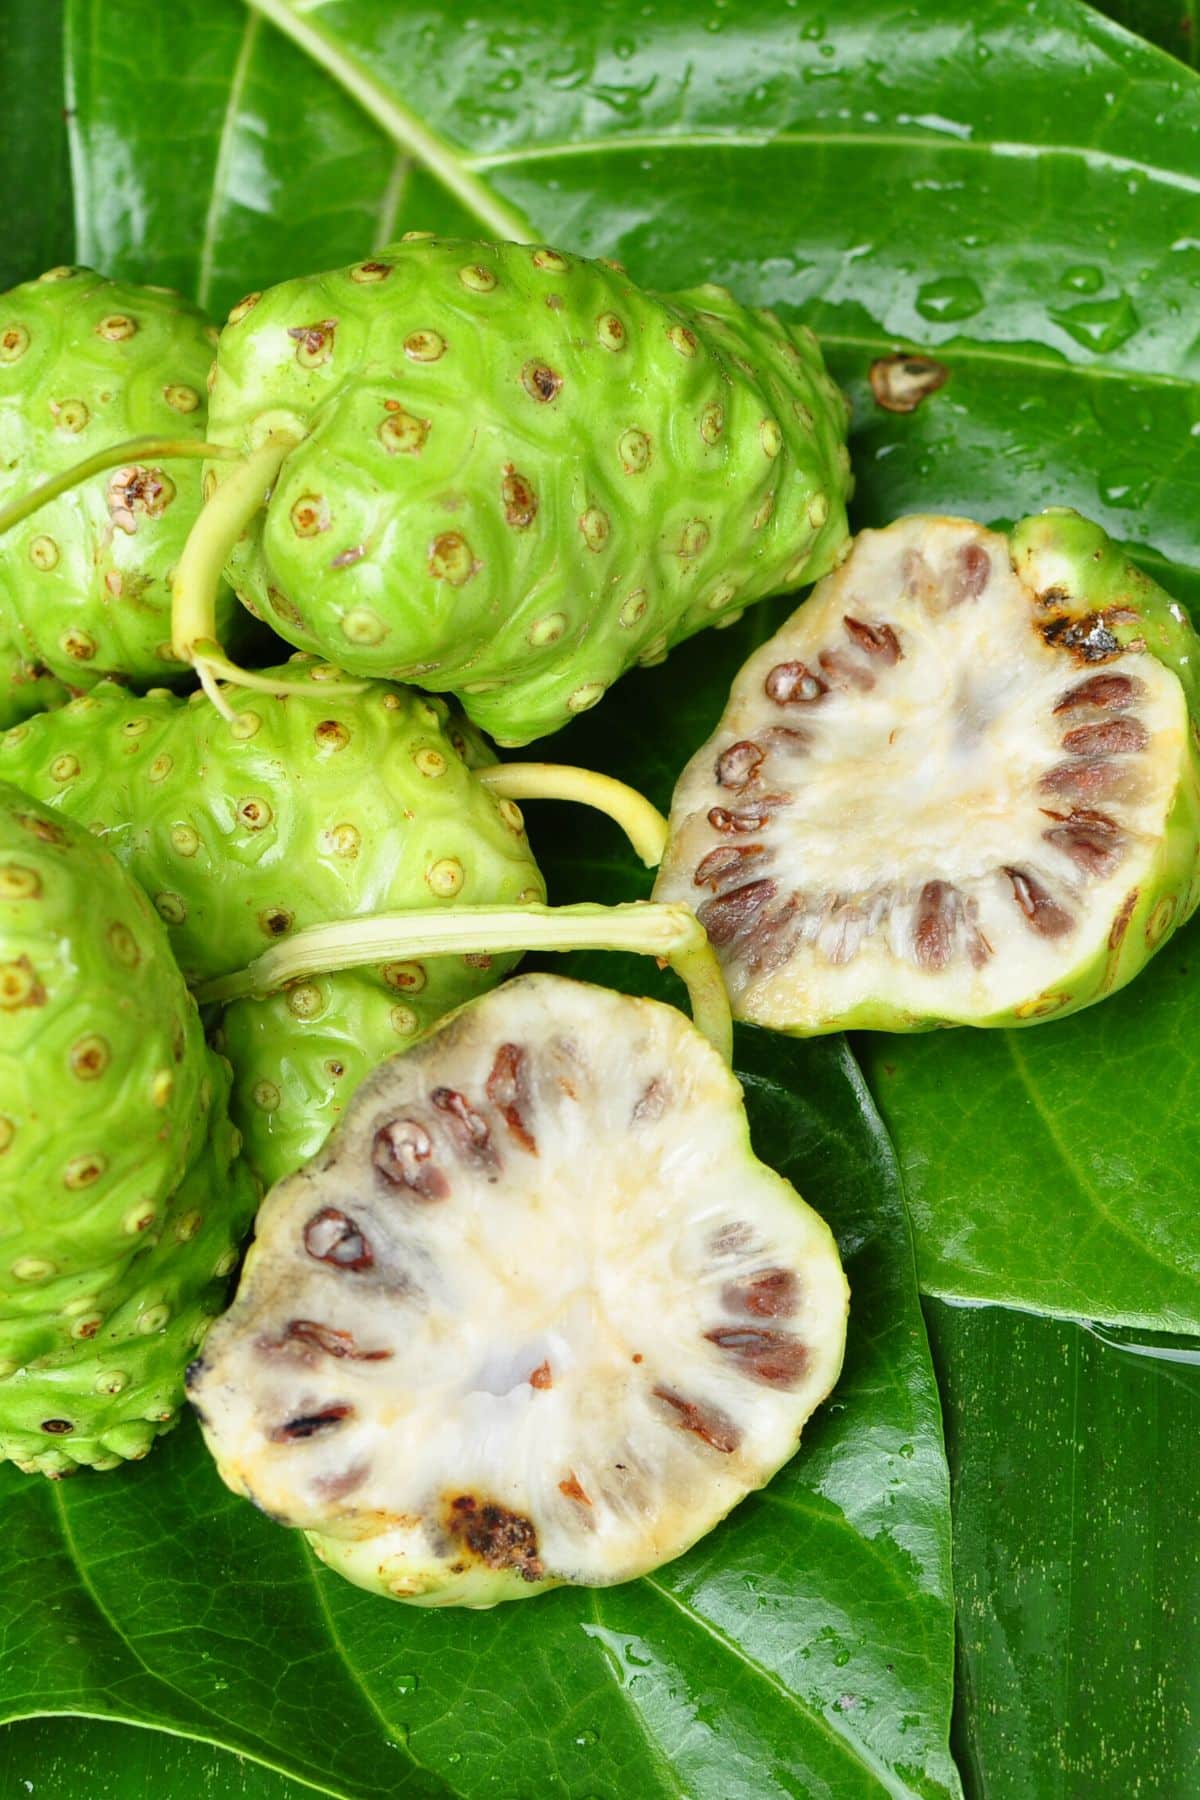 noni fruits cut in half ready to eat.